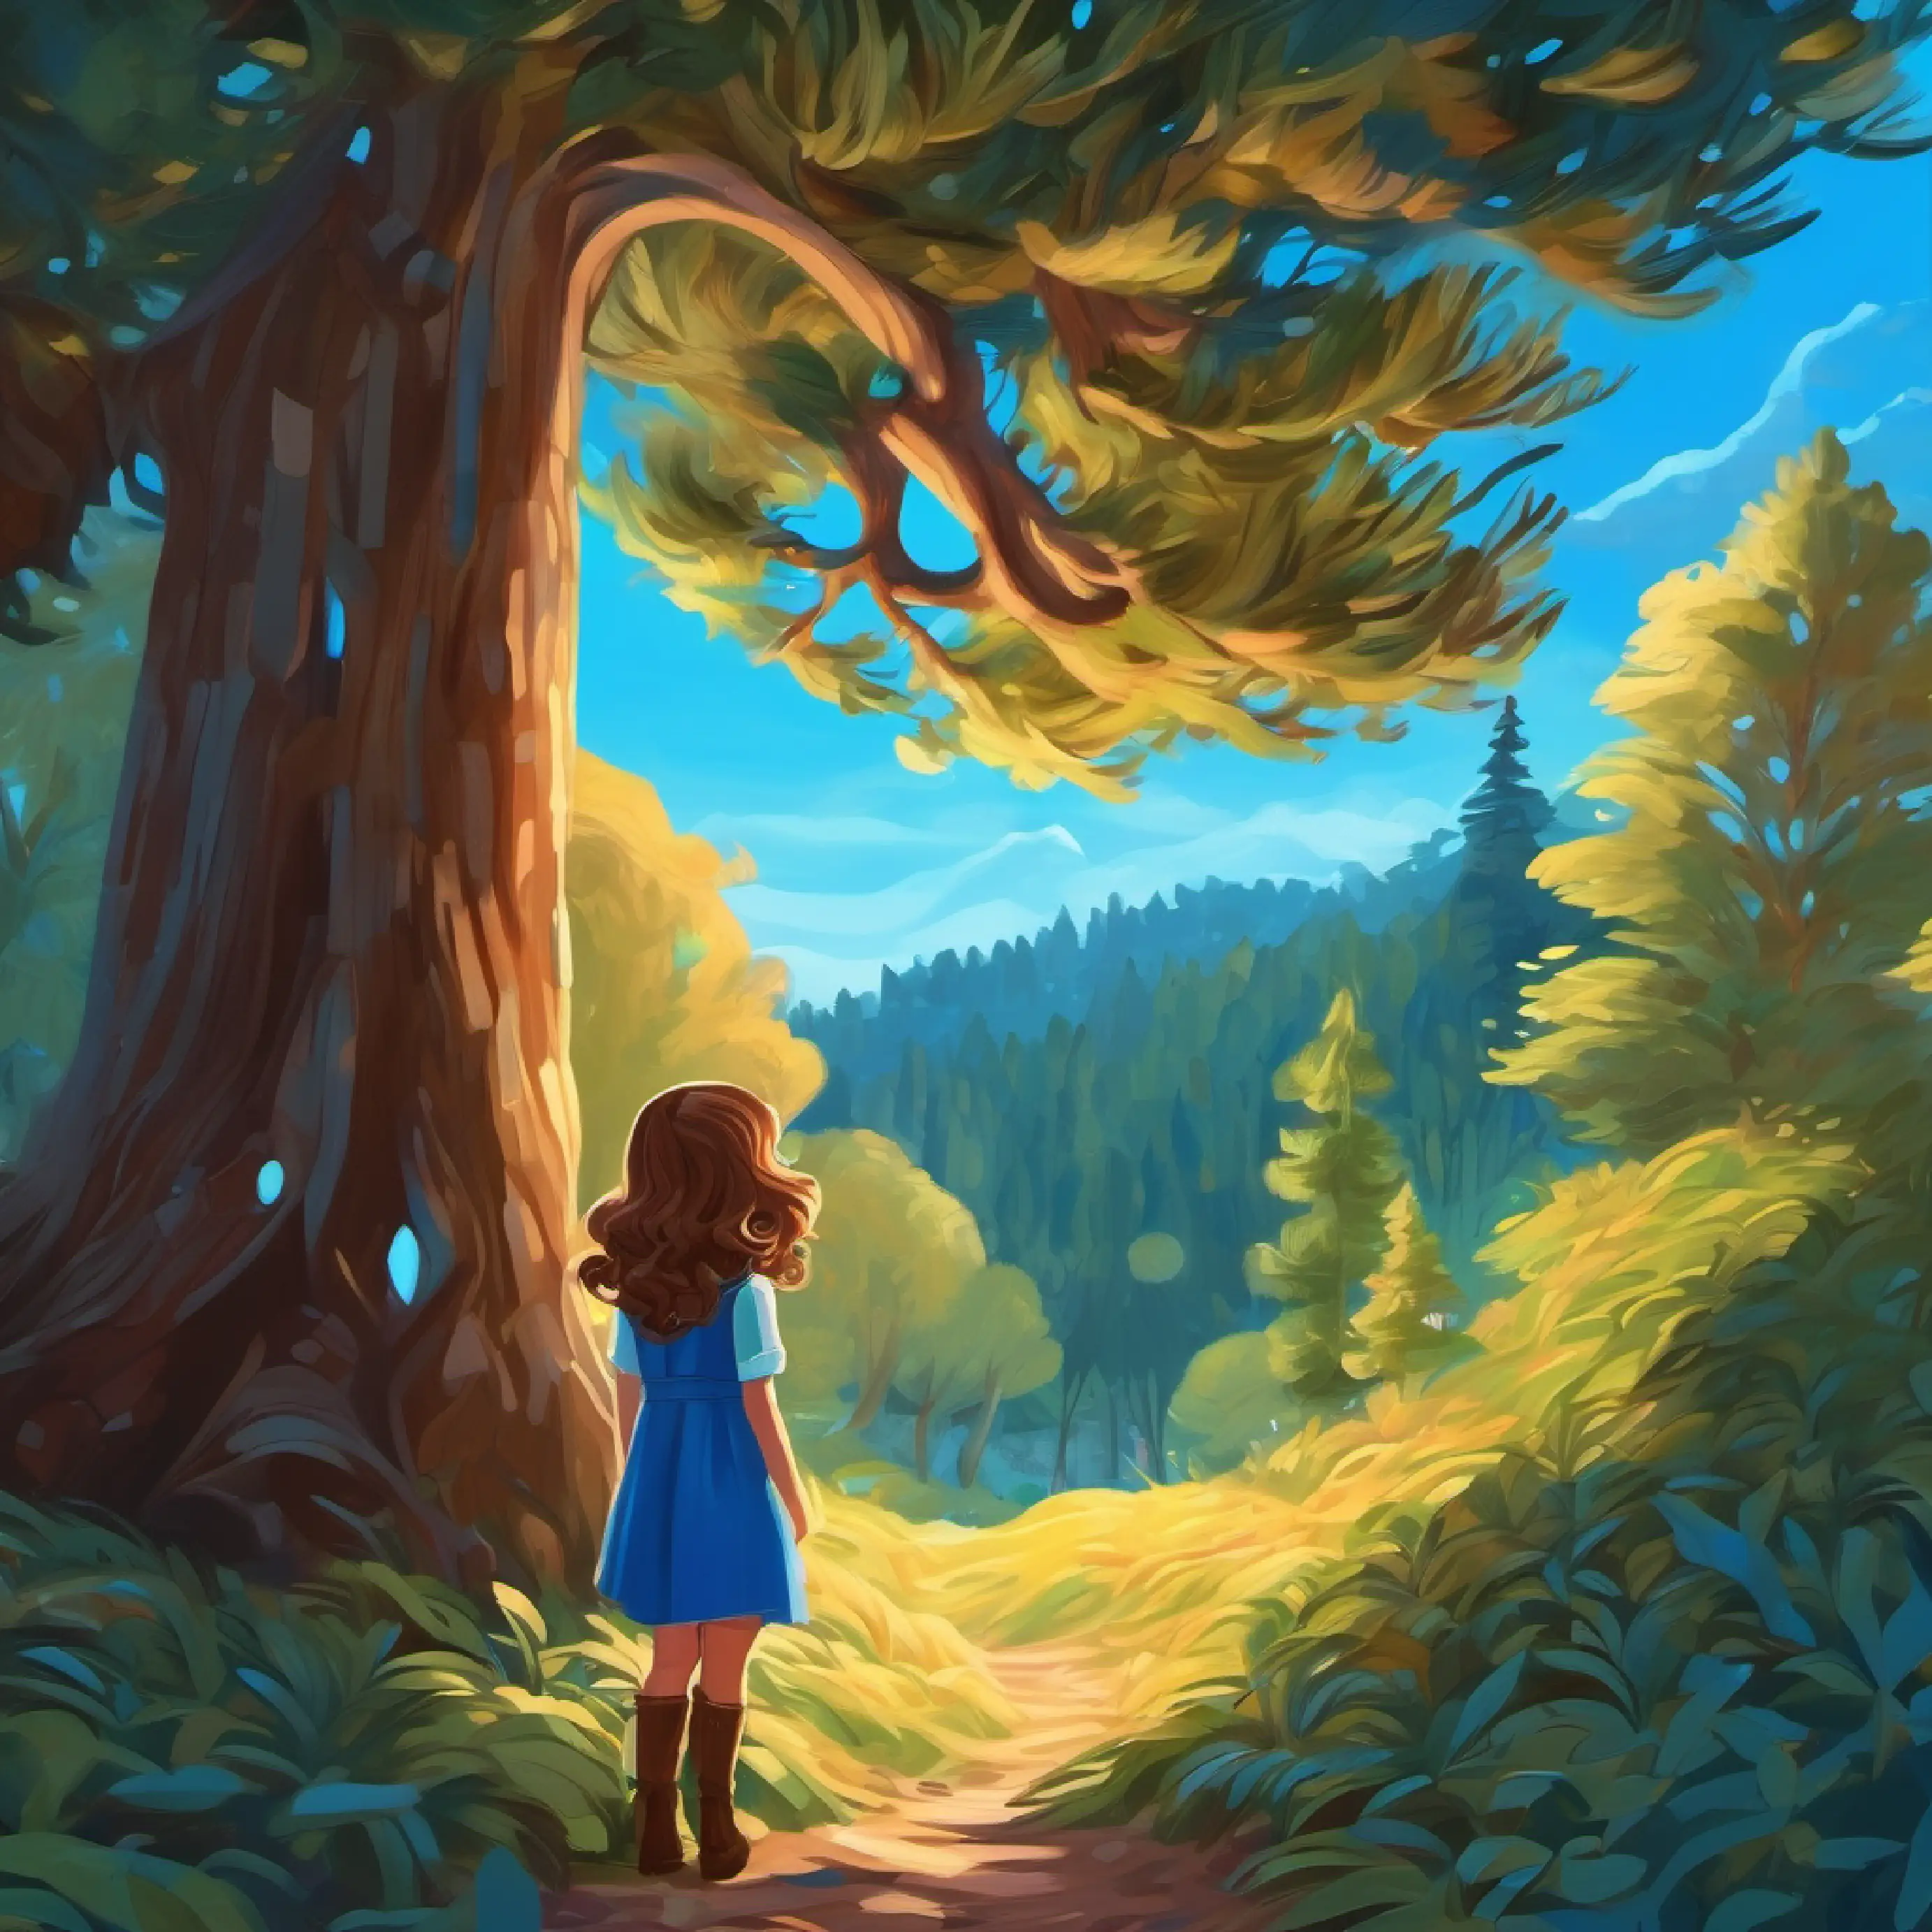 Curious girl, fair skin, wavy brown hair, blue eyes in forest  discovers a majestic  tree